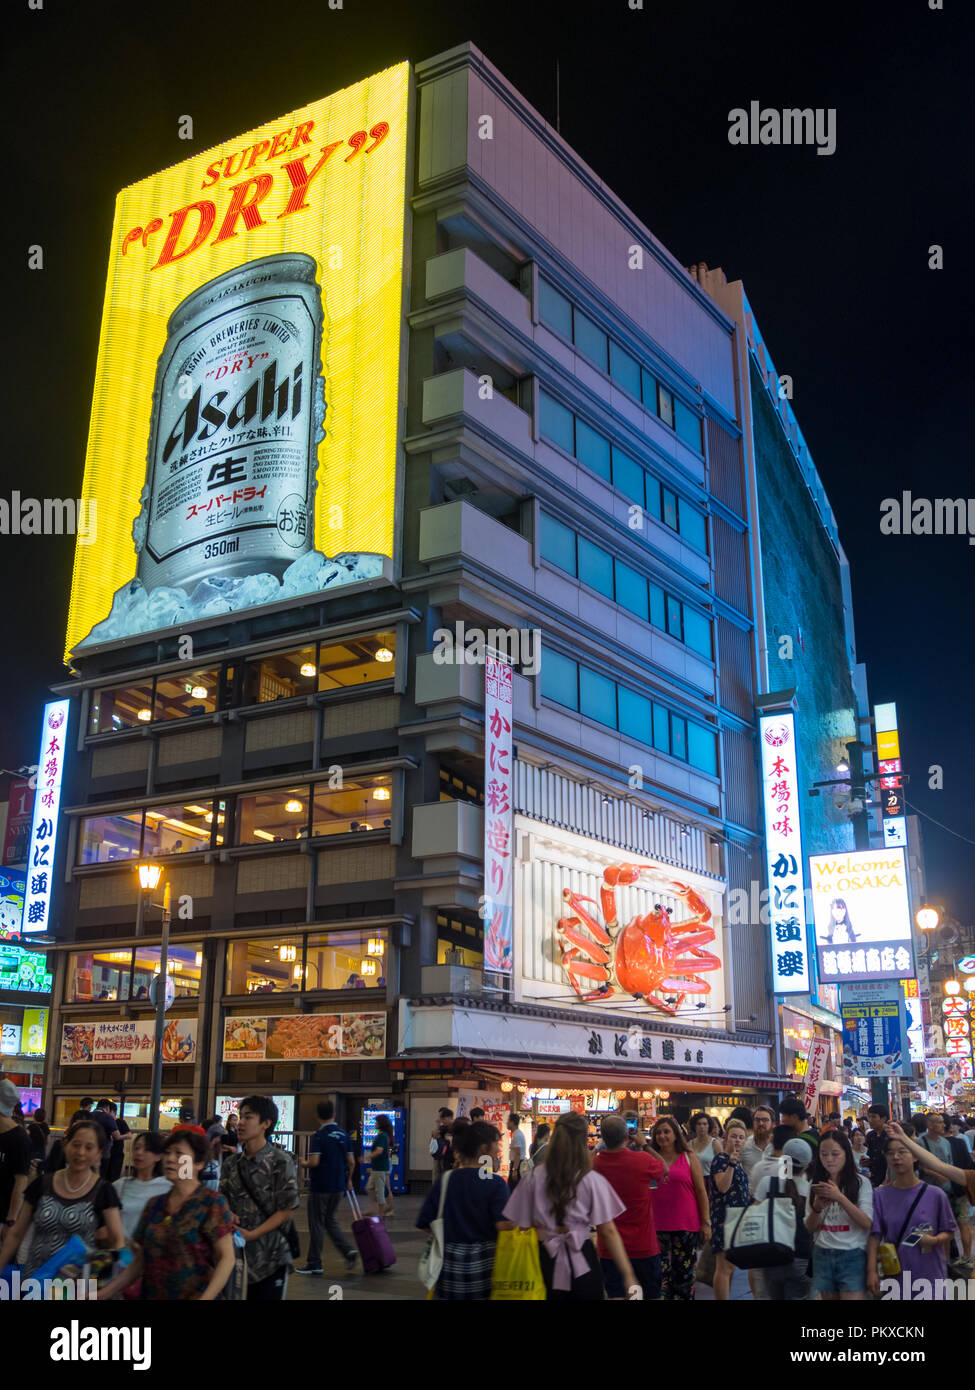 A view of the busy Dotonbori district at night, with the giant crab sign of Kani Doraku restaurant and the Asahi Super Dry neon sign. Osaka, Japan. Stock Photo